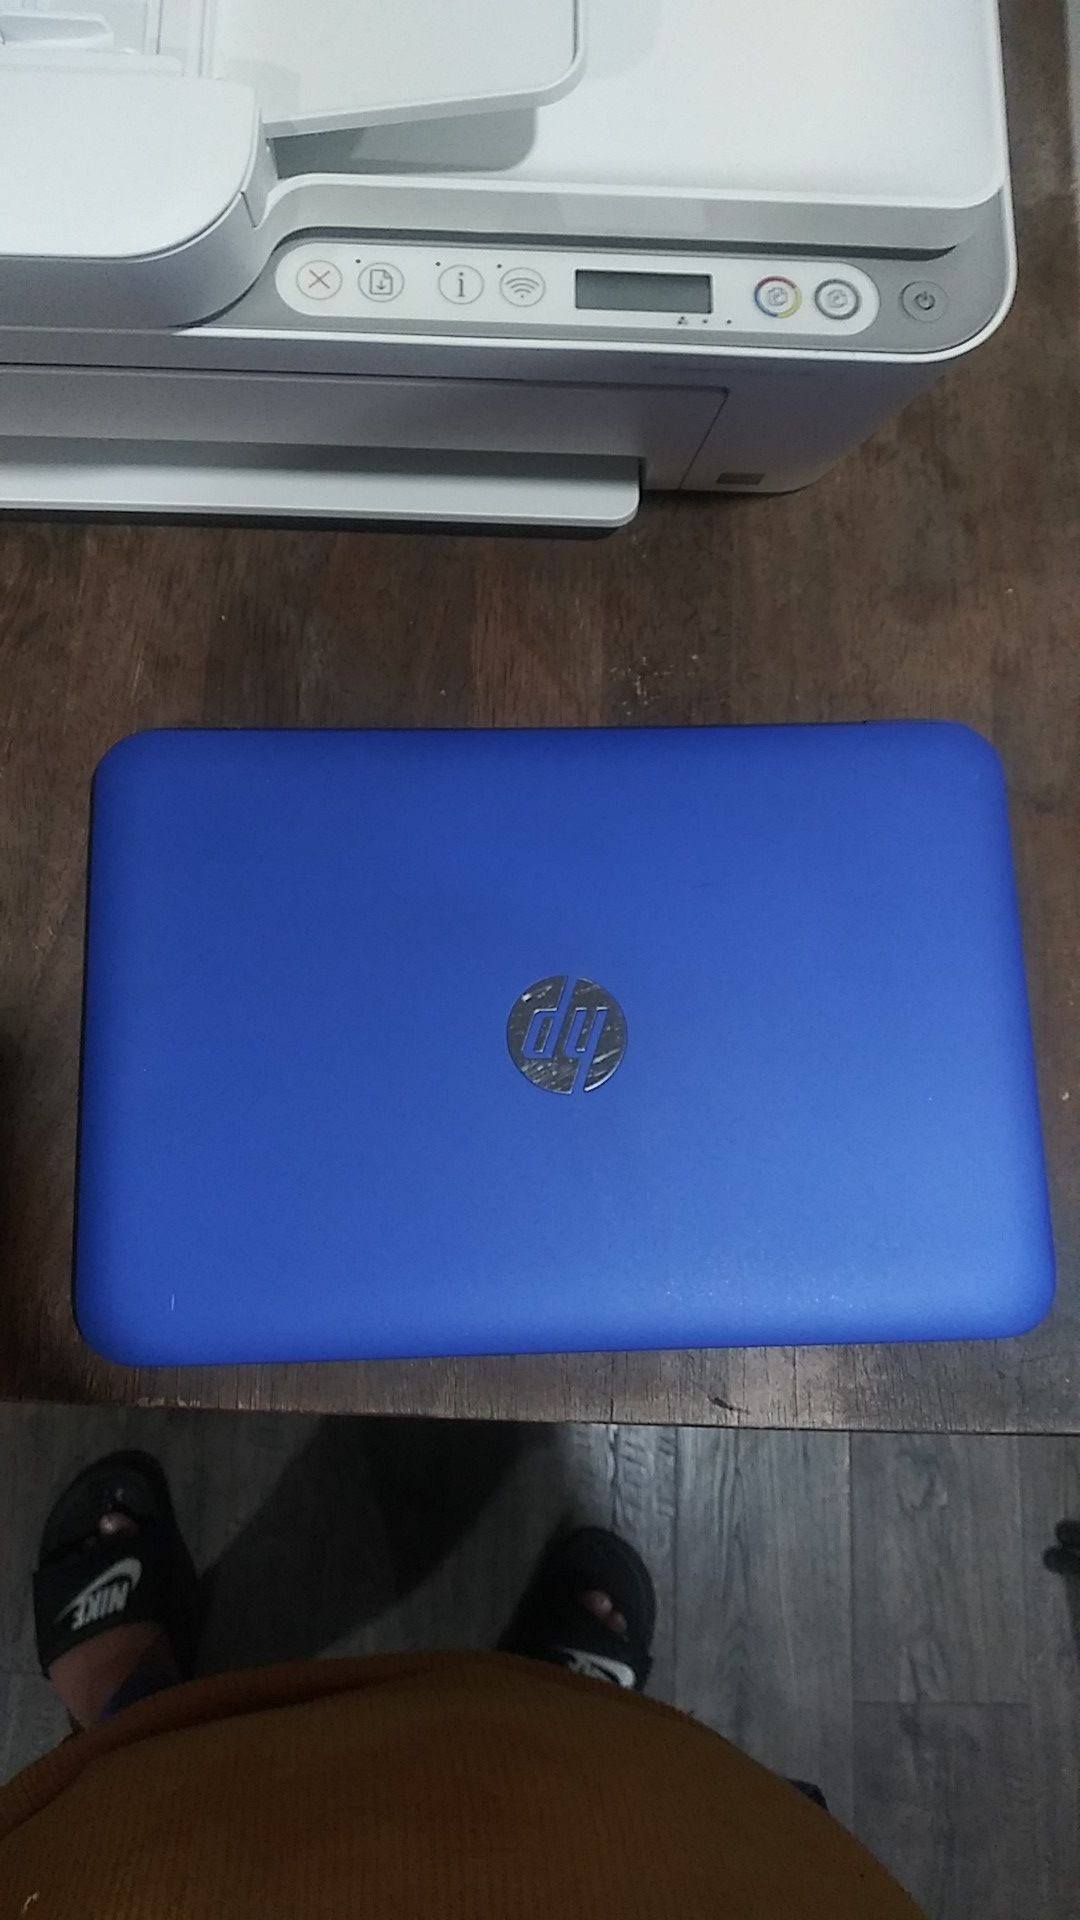 Blue hp computer like new available for pickup can deliver if local